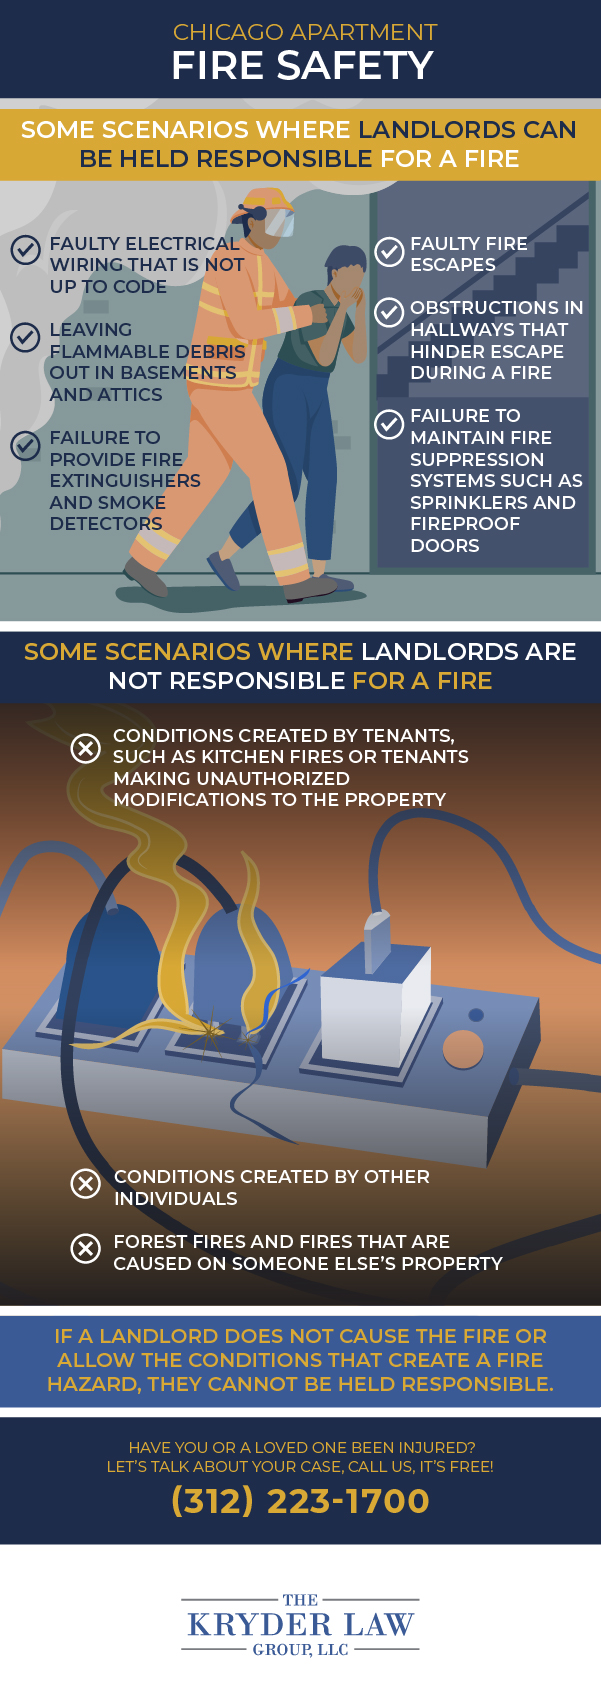 Chicago Apartment Fire Safety Infographic